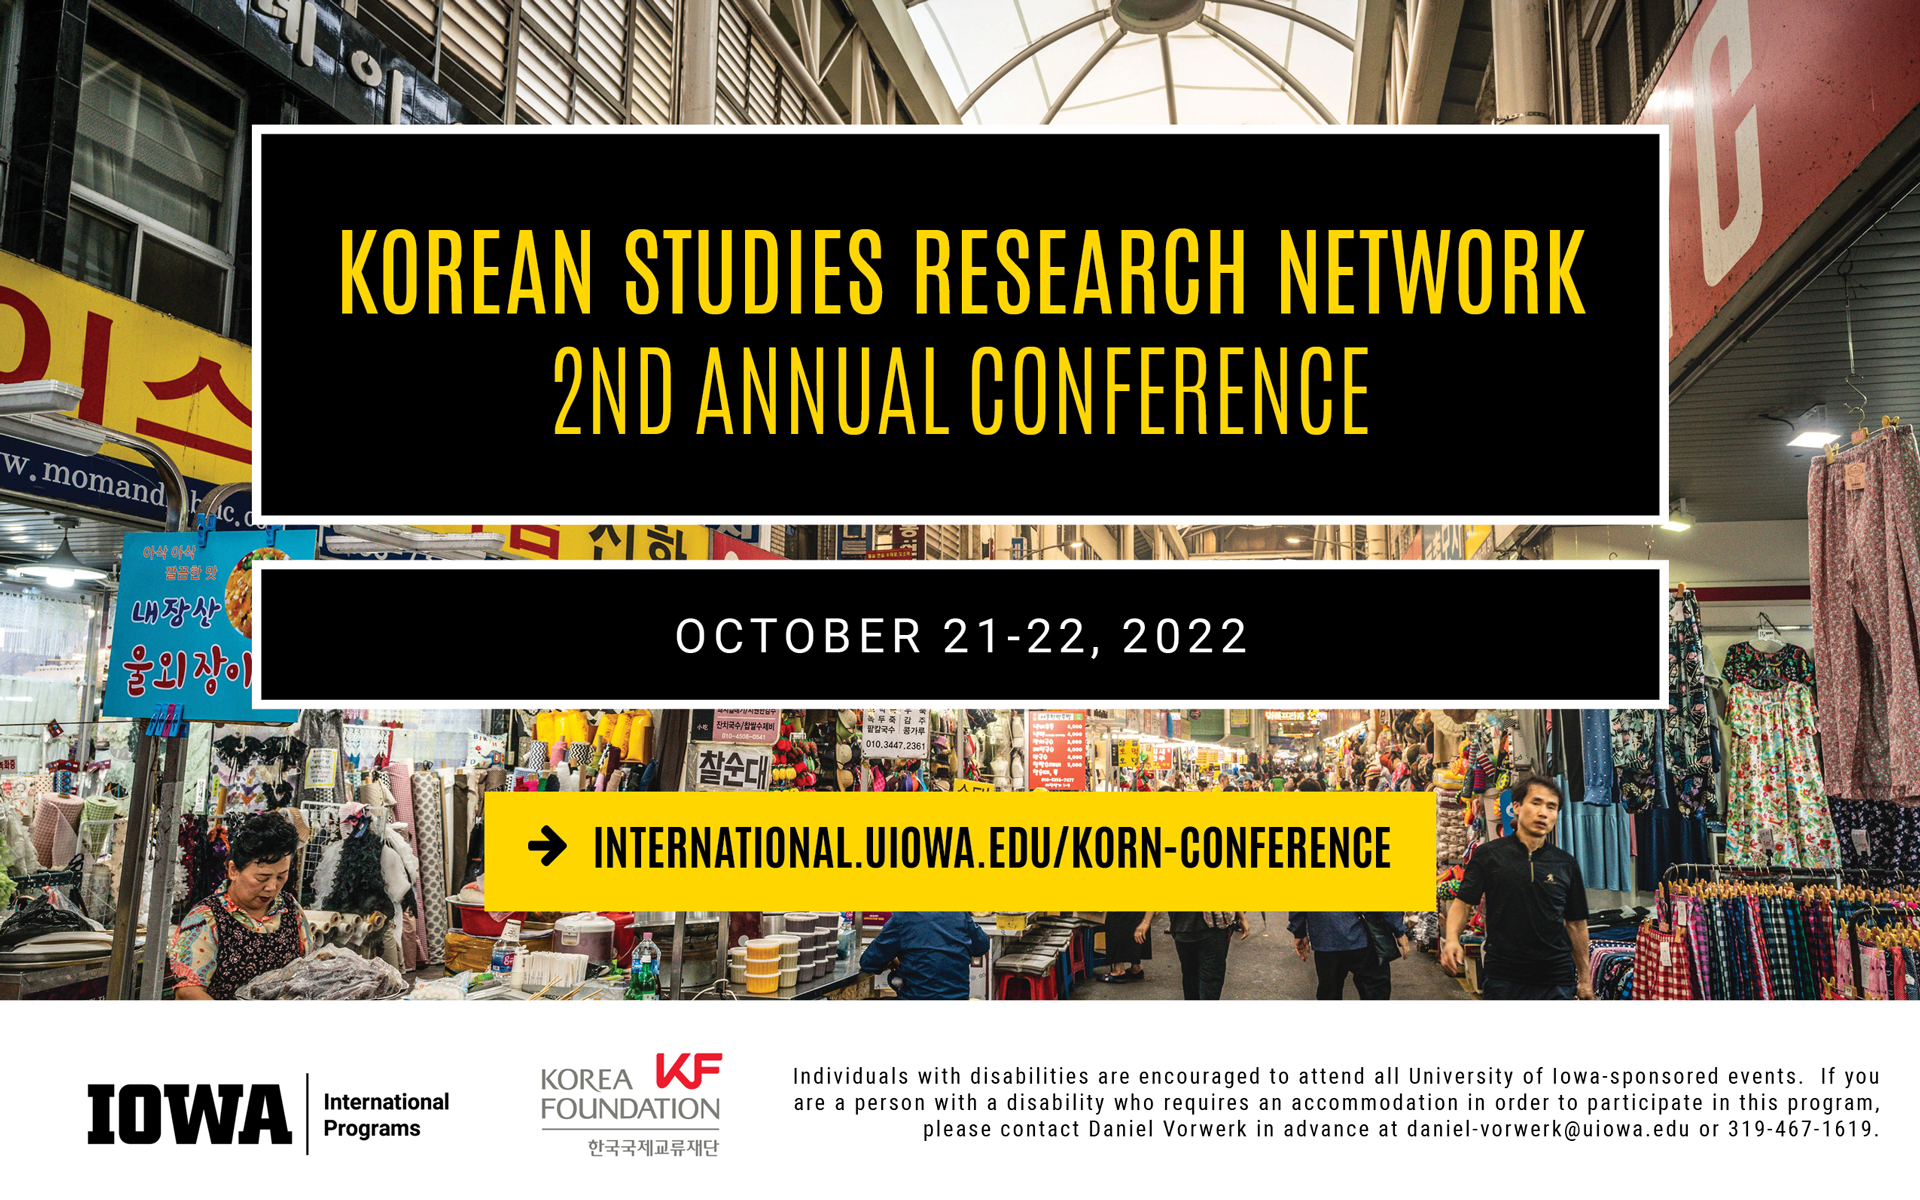 Korean Studies Research Network, second annual conference. October 21-22, 2022. Visit website international.uiowa.edu/korn-conference to learn more. Individuals with disabilities are encouraged to attend all University of Iowa-sponsored events. If you are a person with a disability who requires an accommodation in order to participate in this program, please contact Daniel Vorwerk in advance at daniel-vorwerk@uiowa.edu or 319-467-1619. 